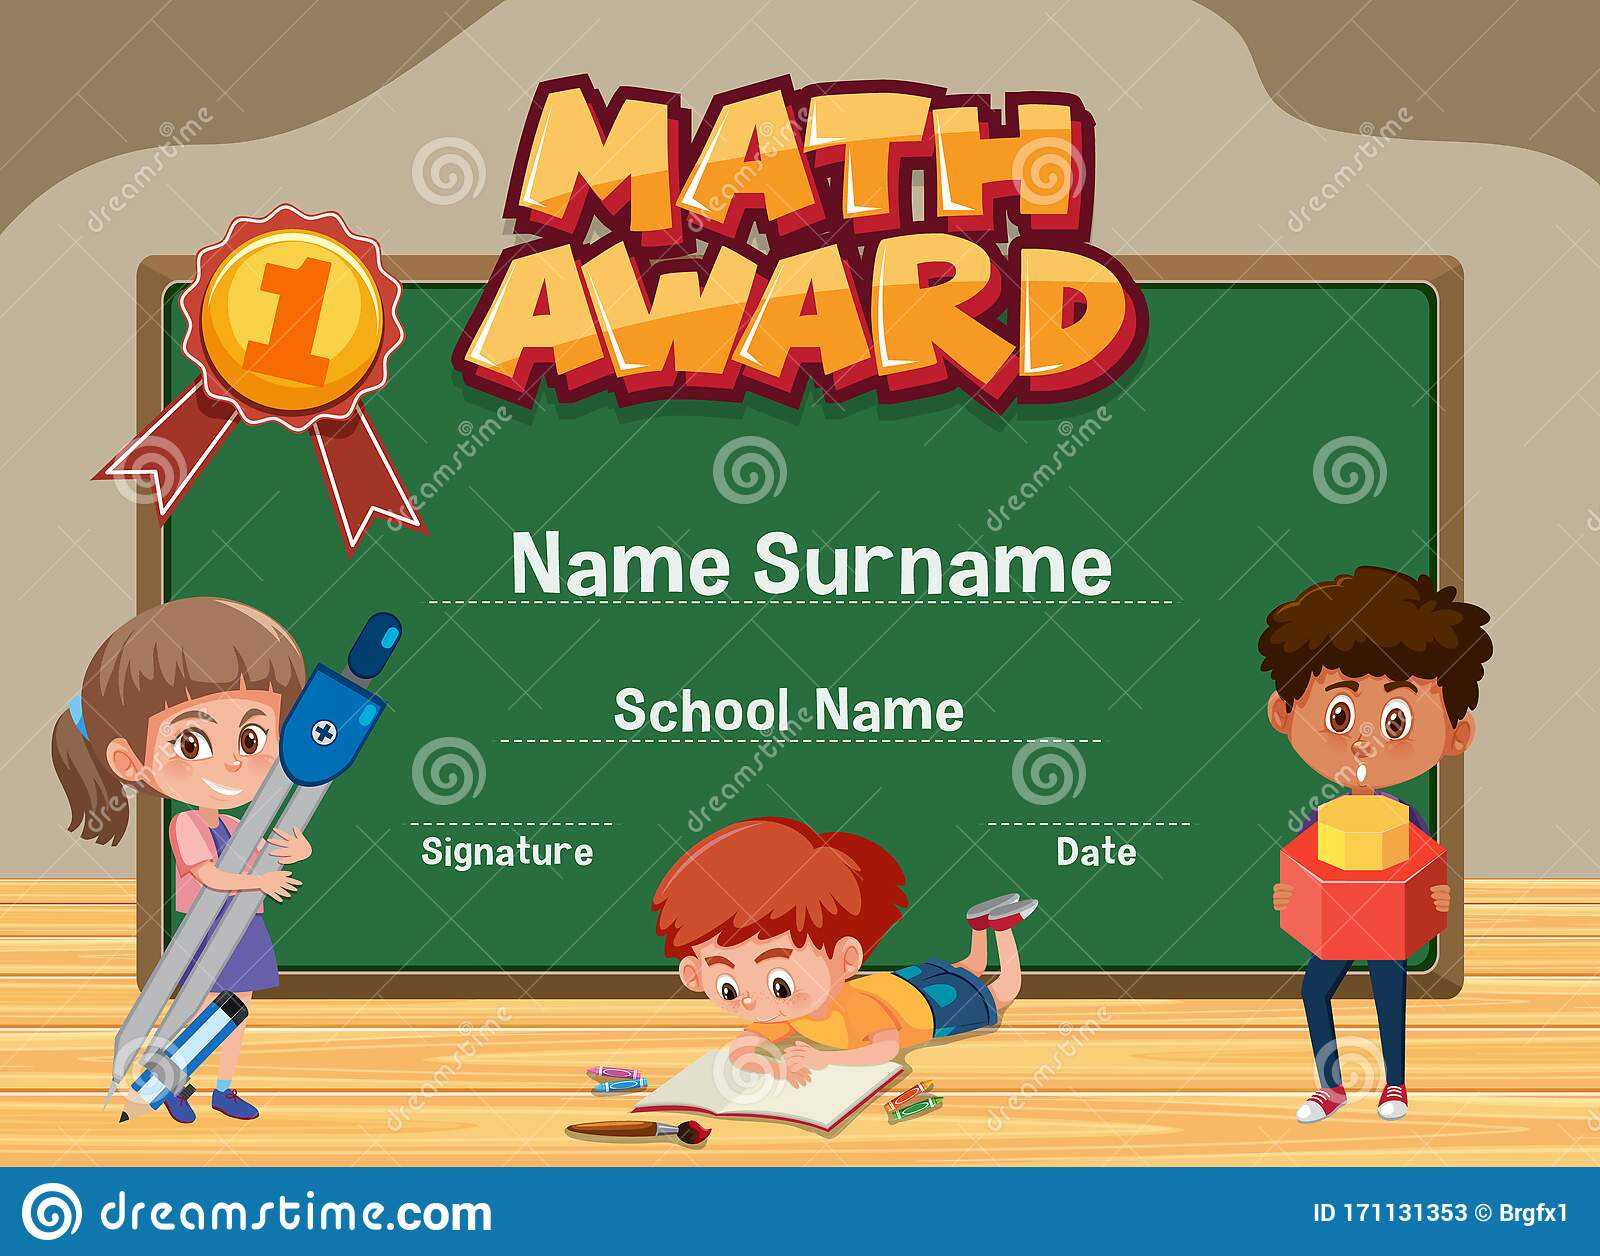 Certificate Template For Math Award With Kids In Classroom With Math Certificate Template